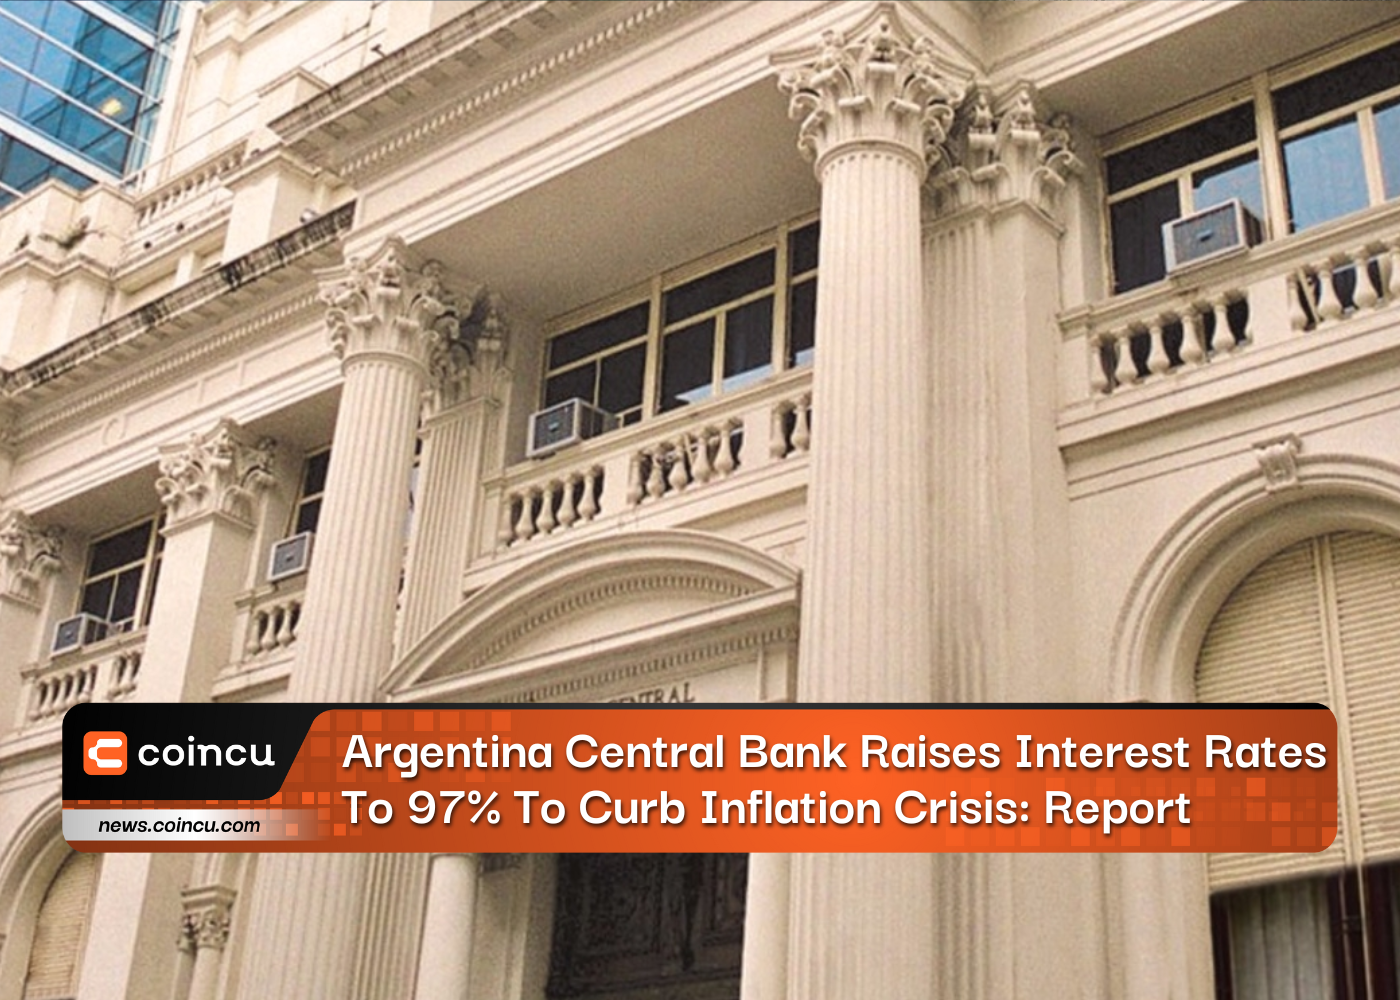 Argentina Central Bank Raises Interest Rates To 97% To Curb Inflation Crisis: Report